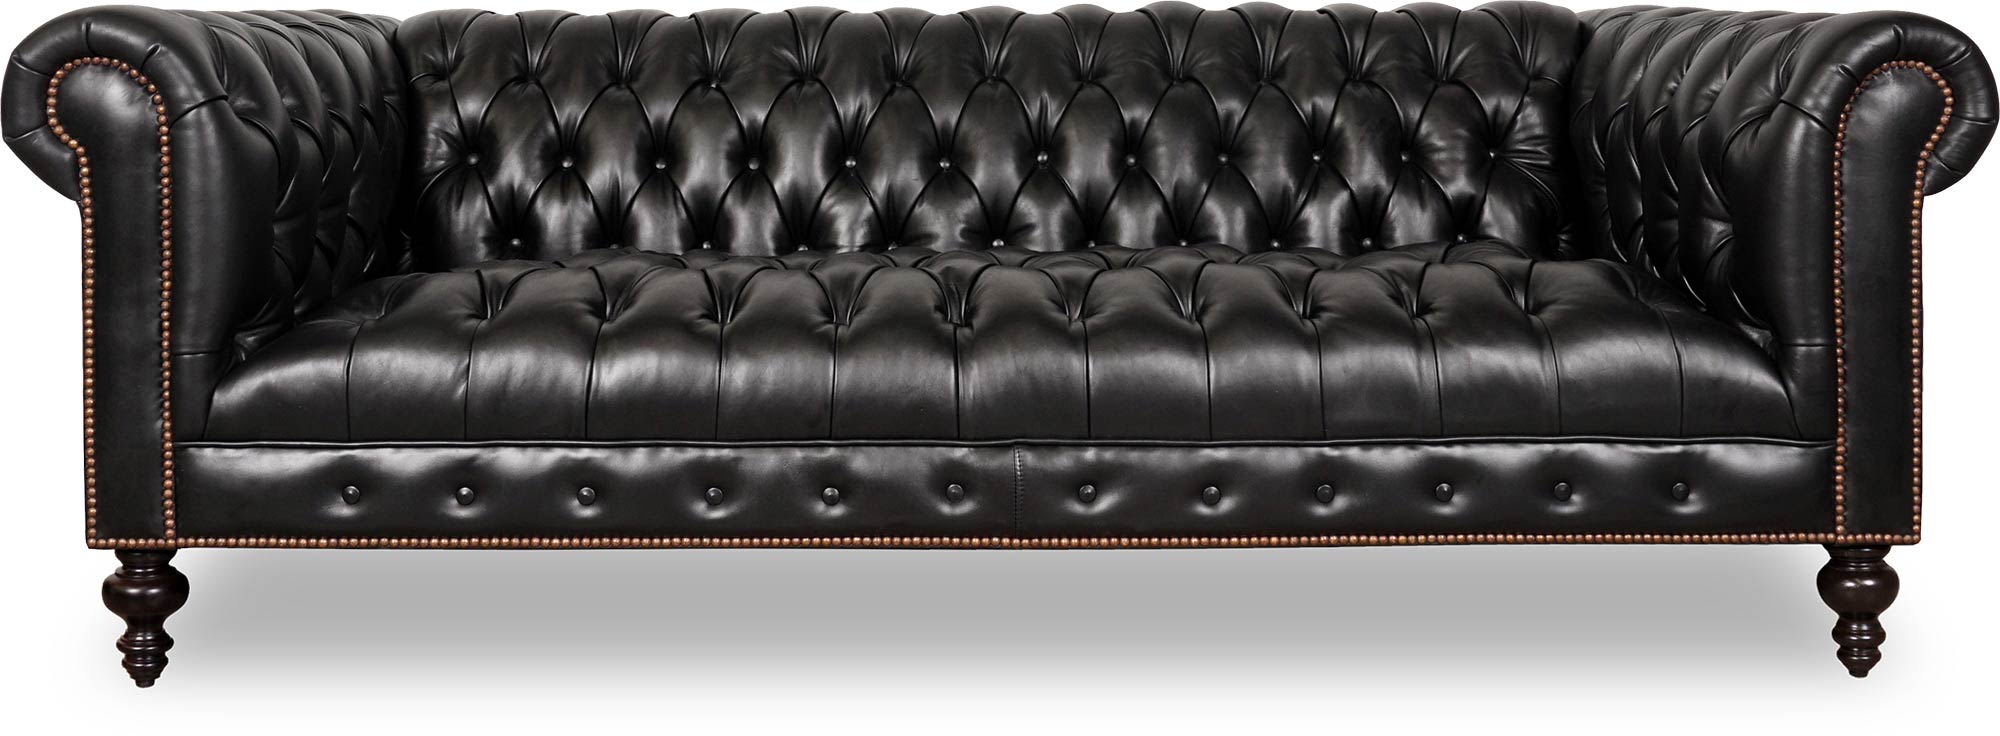 Higgins Chesterfield sofa in Perspecive Pitch Black with tufted seat